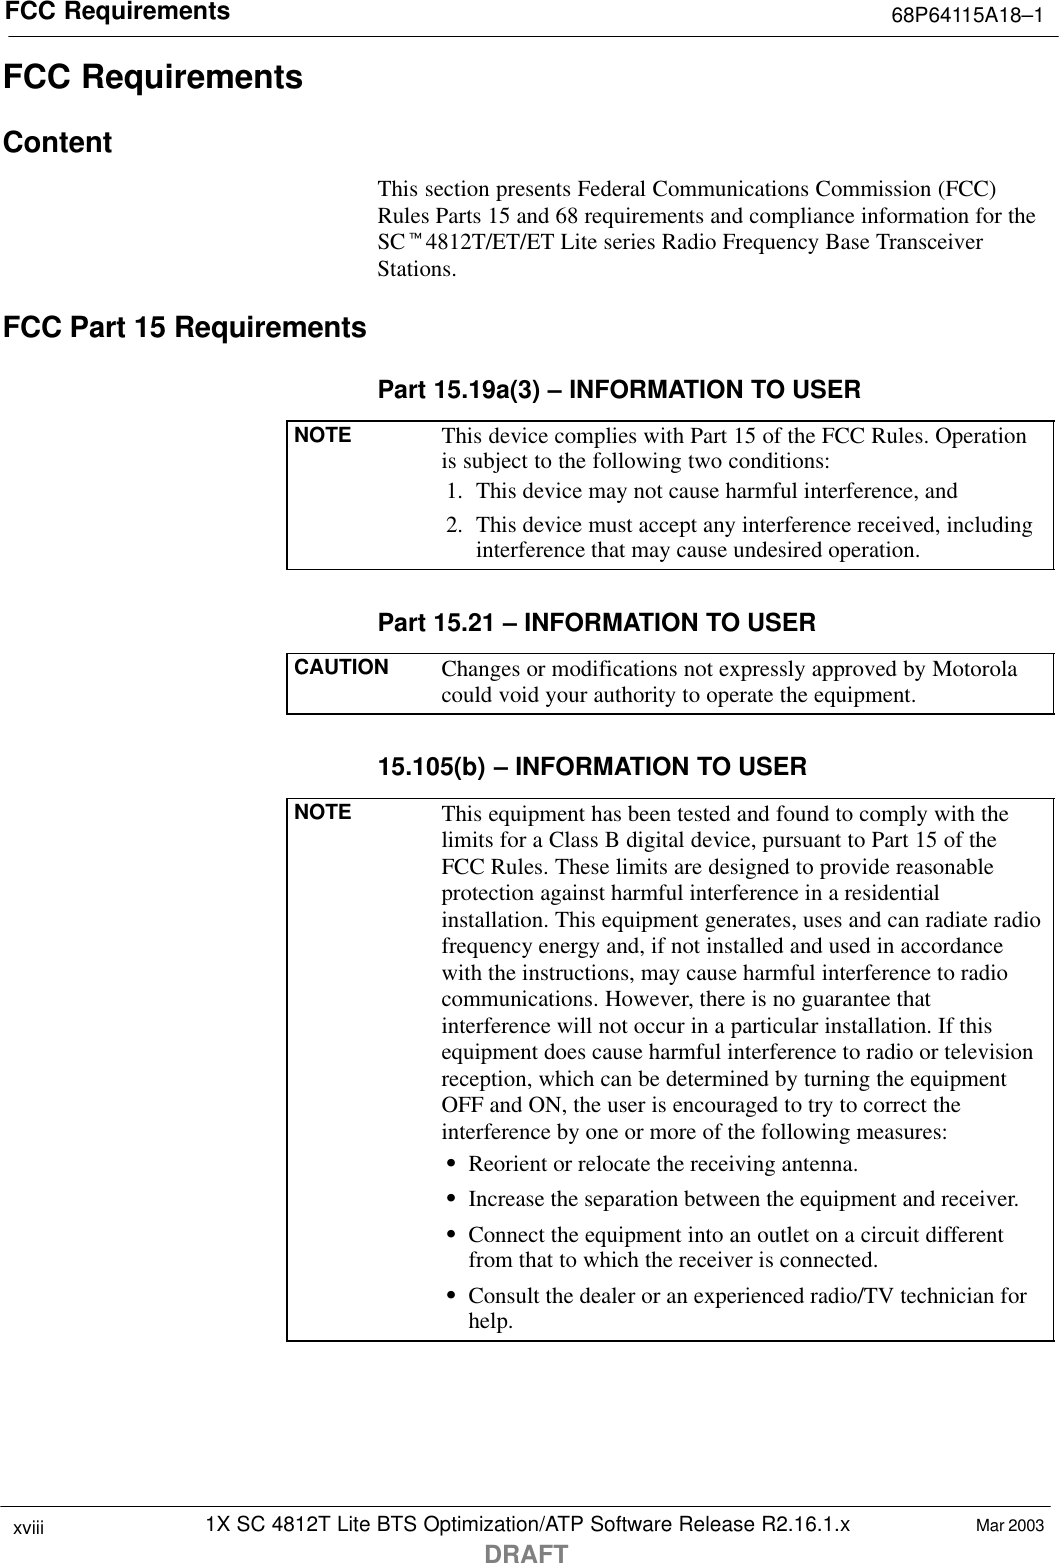 FCC Requirements 68P64115A18–11X SC 4812T Lite BTS Optimization/ATP Software Release R2.16.1.xDRAFTxviii Mar 2003FCC RequirementsContentThis section presents Federal Communications Commission (FCC)Rules Parts 15 and 68 requirements and compliance information for theSCt4812T/ET/ET Lite series Radio Frequency Base TransceiverStations.FCC Part 15 RequirementsPart 15.19a(3) – INFORMATION TO USERNOTE This device complies with Part 15 of the FCC Rules. Operationis subject to the following two conditions:1. This device may not cause harmful interference, and2. This device must accept any interference received, includinginterference that may cause undesired operation.Part 15.21 – INFORMATION TO USERCAUTION Changes or modifications not expressly approved by Motorolacould void your authority to operate the equipment.15.105(b) – INFORMATION TO USERNOTE This equipment has been tested and found to comply with thelimits for a Class B digital device, pursuant to Part 15 of theFCC Rules. These limits are designed to provide reasonableprotection against harmful interference in a residentialinstallation. This equipment generates, uses and can radiate radiofrequency energy and, if not installed and used in accordancewith the instructions, may cause harmful interference to radiocommunications. However, there is no guarantee thatinterference will not occur in a particular installation. If thisequipment does cause harmful interference to radio or televisionreception, which can be determined by turning the equipmentOFF and ON, the user is encouraged to try to correct theinterference by one or more of the following measures:SReorient or relocate the receiving antenna.SIncrease the separation between the equipment and receiver.SConnect the equipment into an outlet on a circuit differentfrom that to which the receiver is connected.SConsult the dealer or an experienced radio/TV technician forhelp.